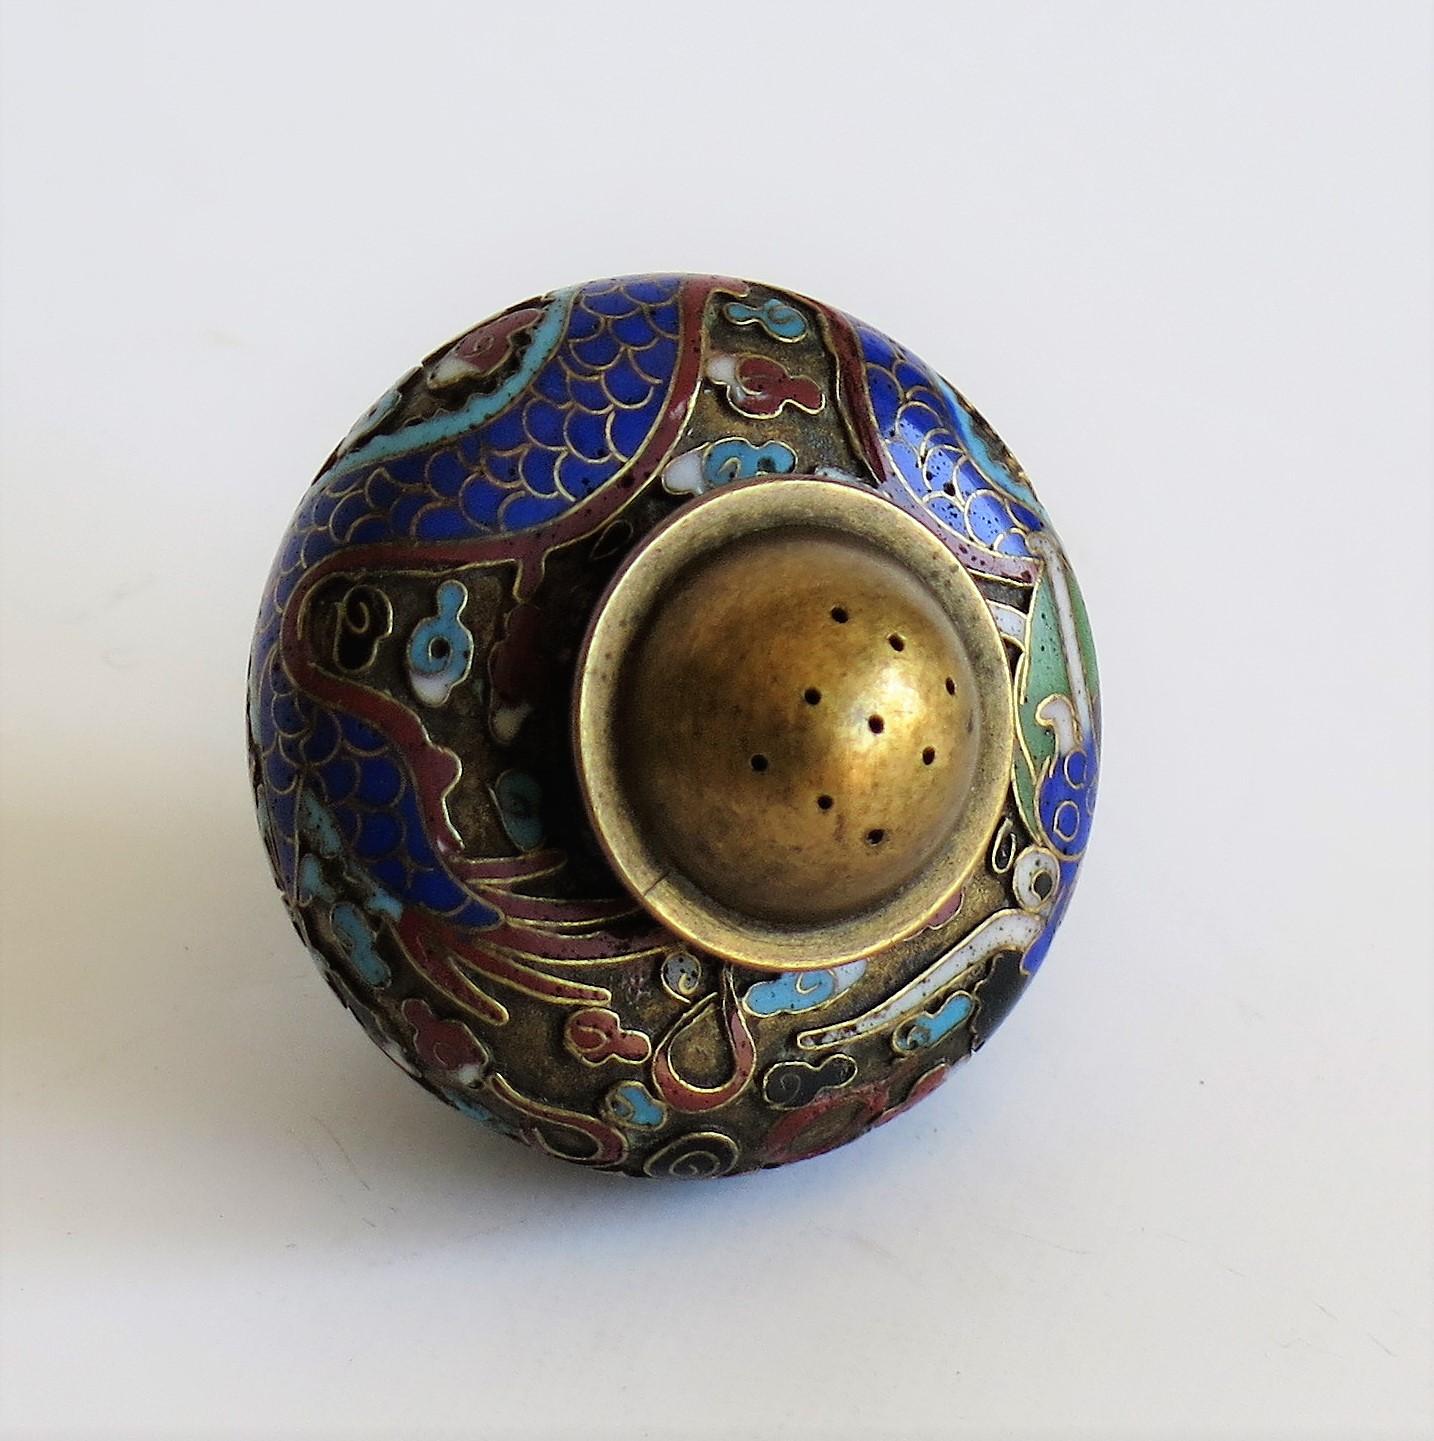 19th Century Chinese Cloisonné Pepper Pot with Dragon Decoration, Qing Dynasty 10